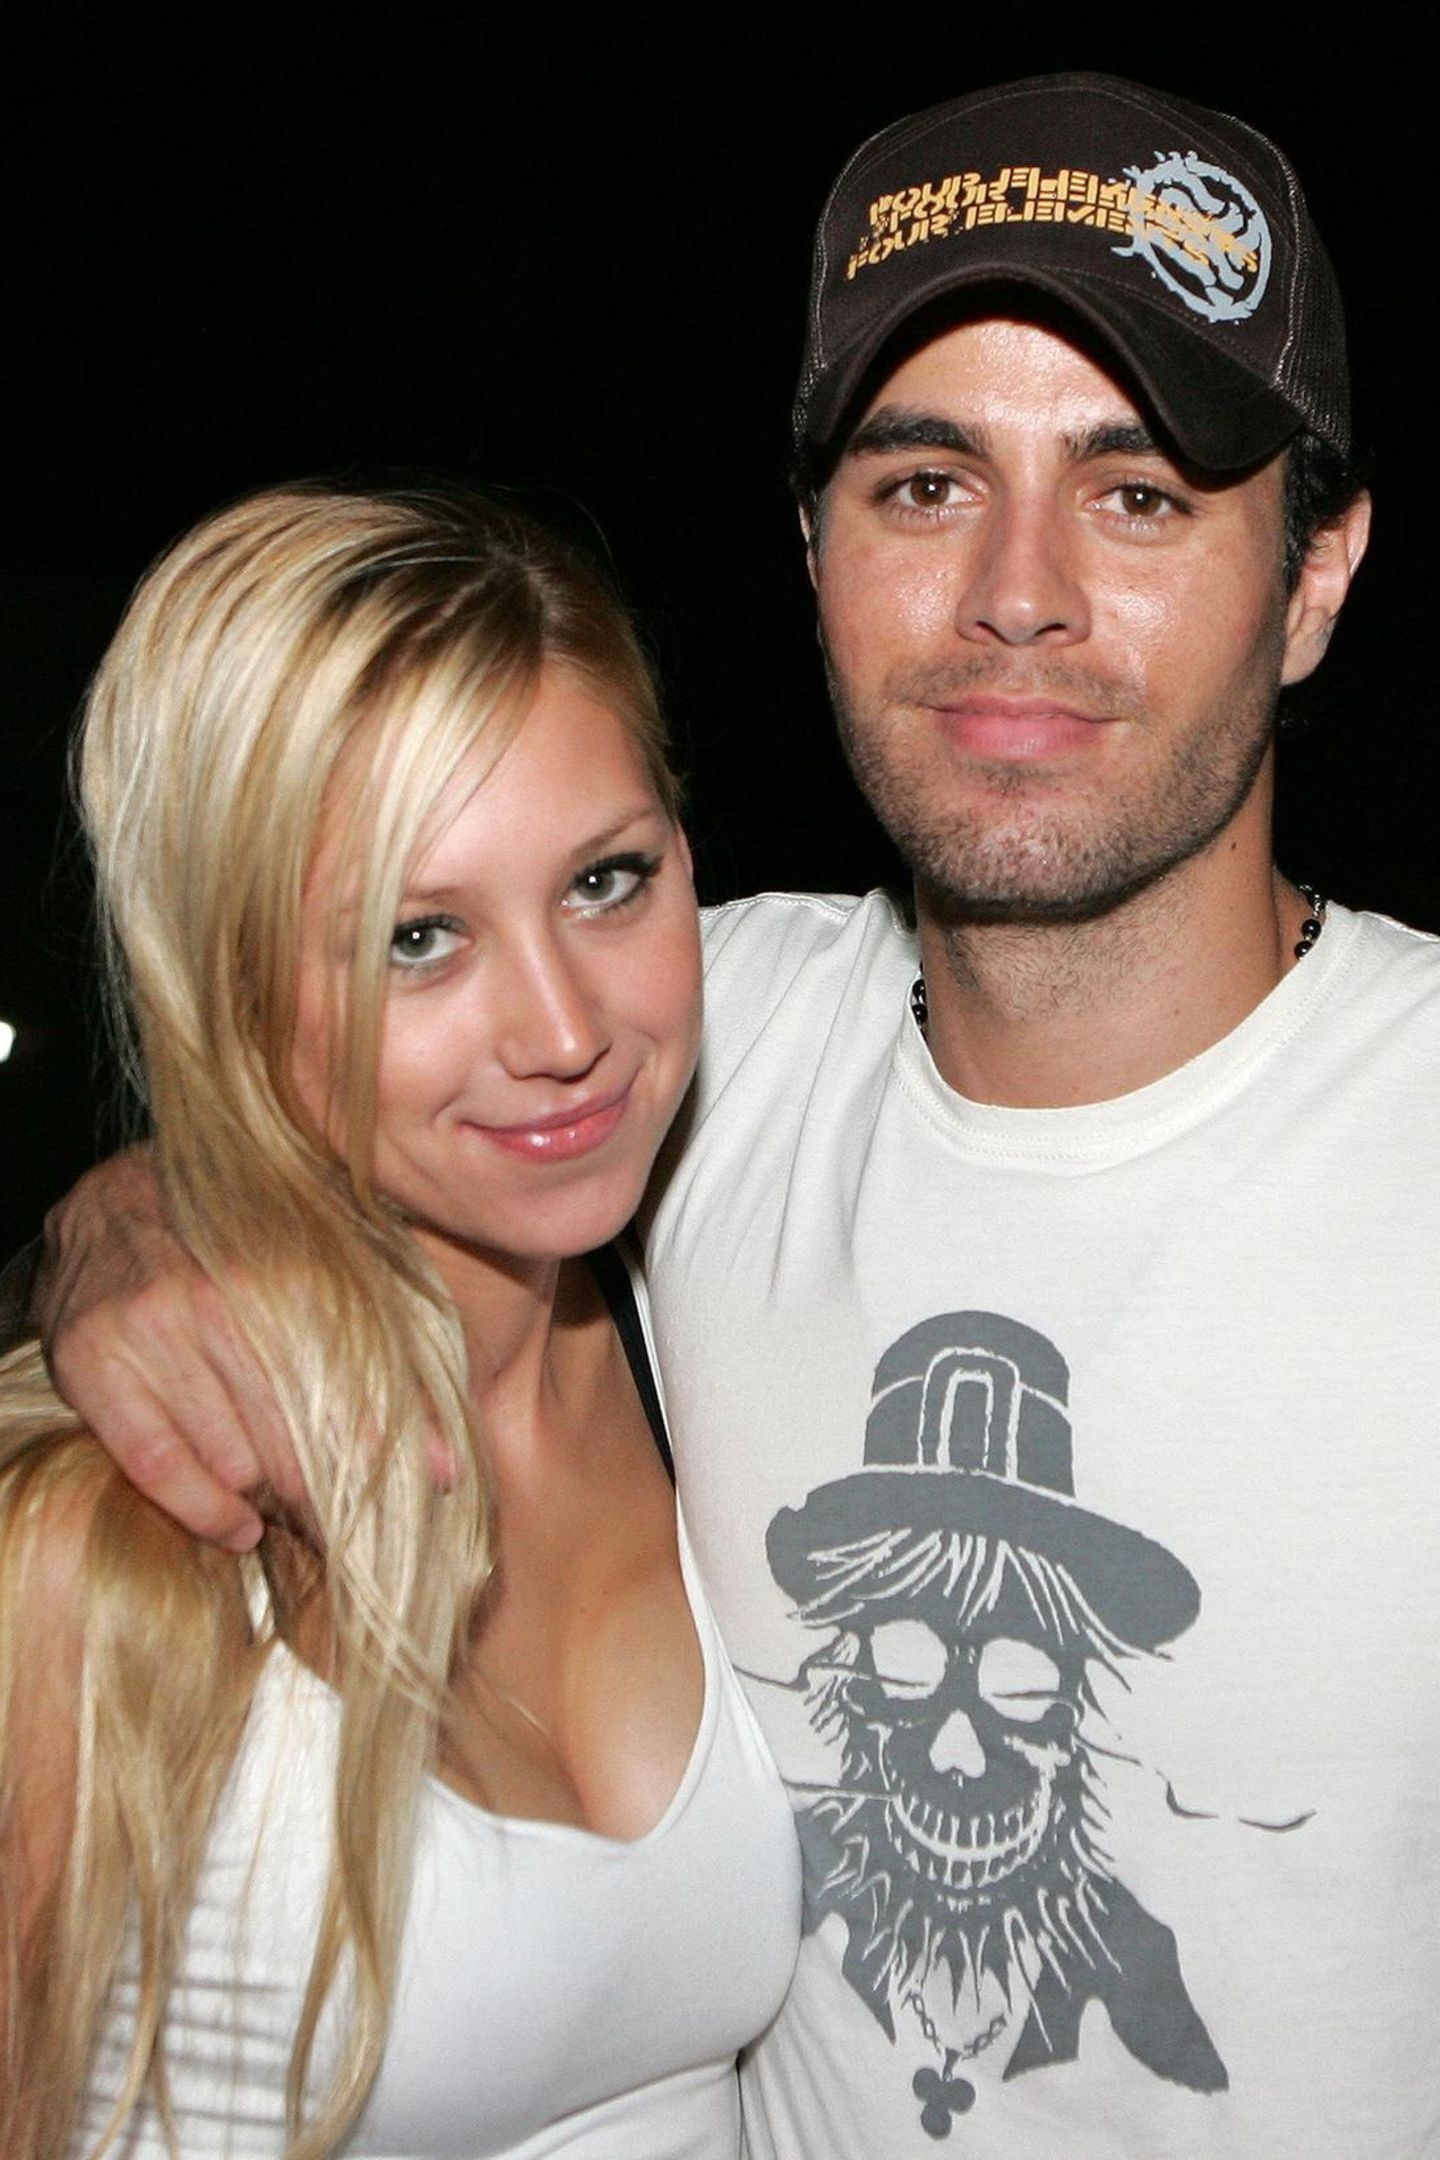 Enrique Iglesias and Anna Kournikova: Singer and former tennis pro have been together for 21 years and have 3 children. 1440x2160 HD Background.